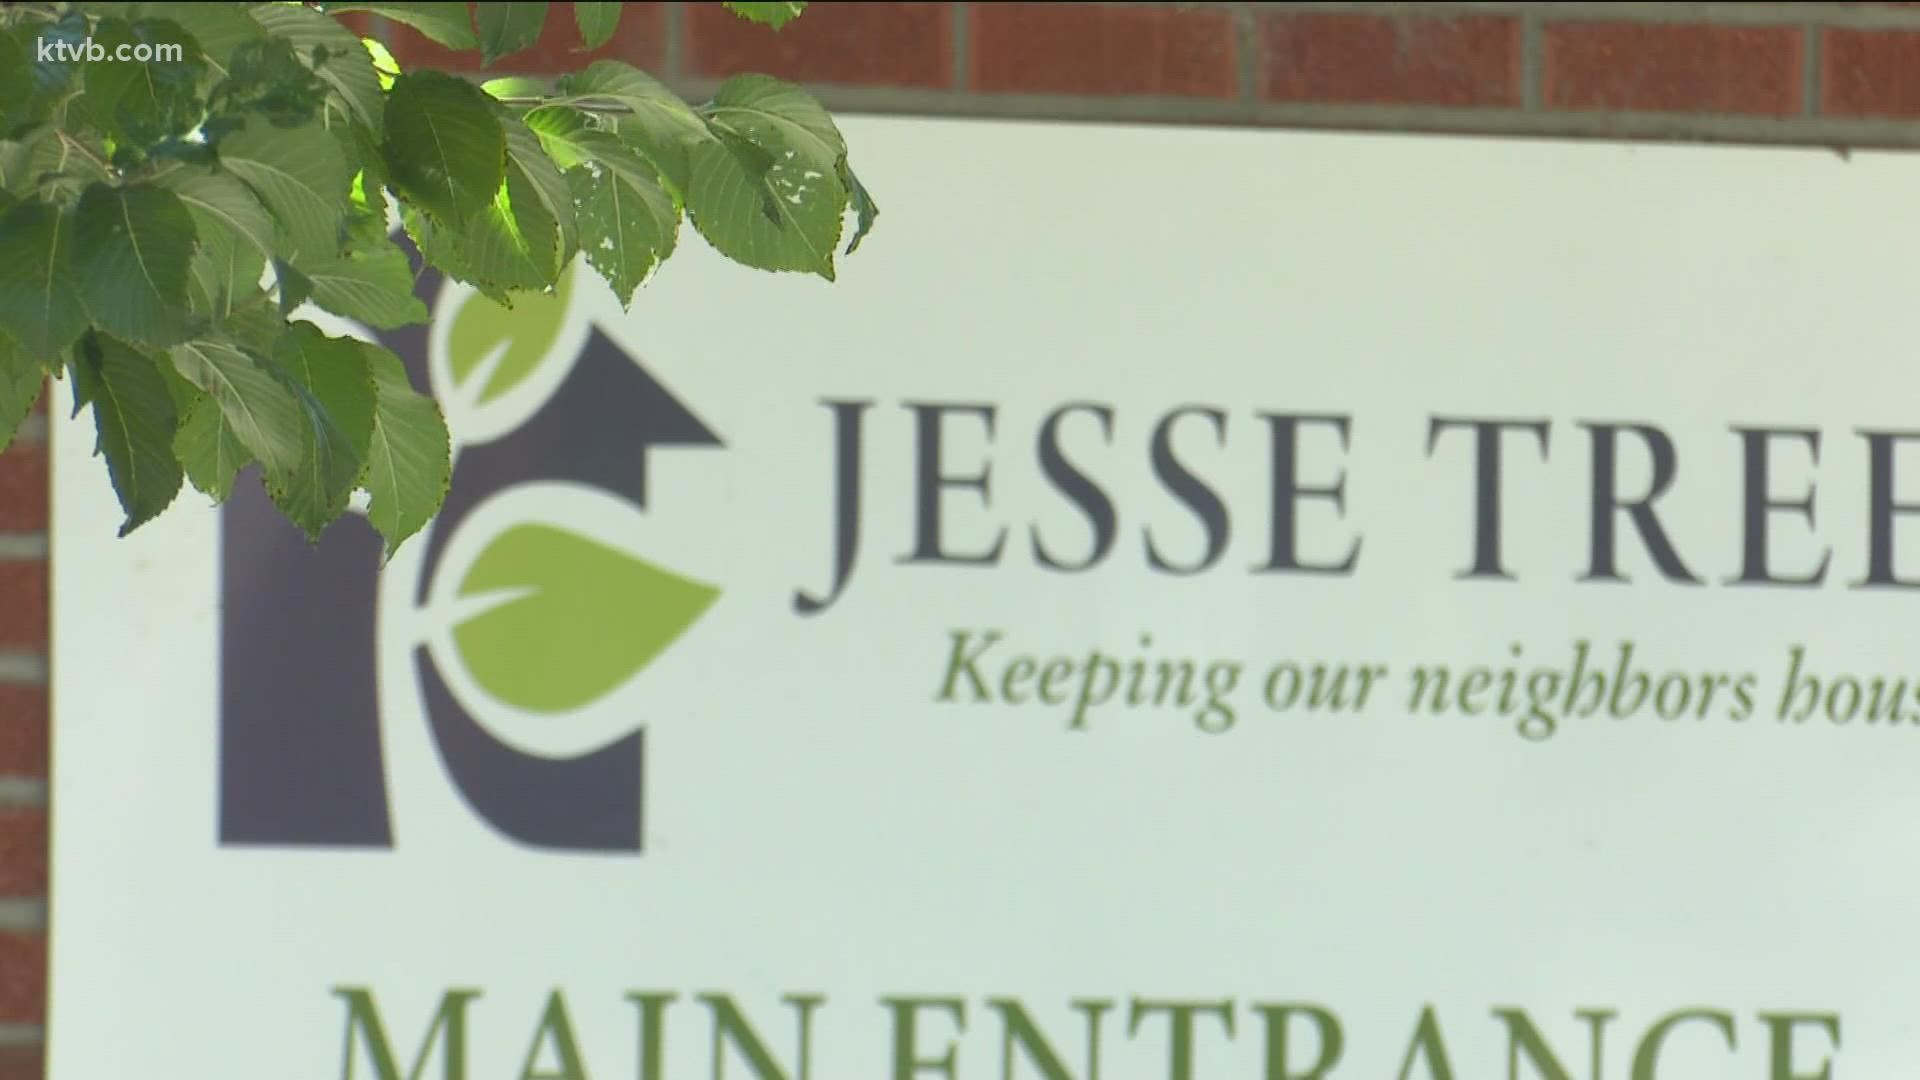 Jesse Tree has been awarded a $100,000 grant that will help create a new position to address residents facing eviction's health and wellness issues.